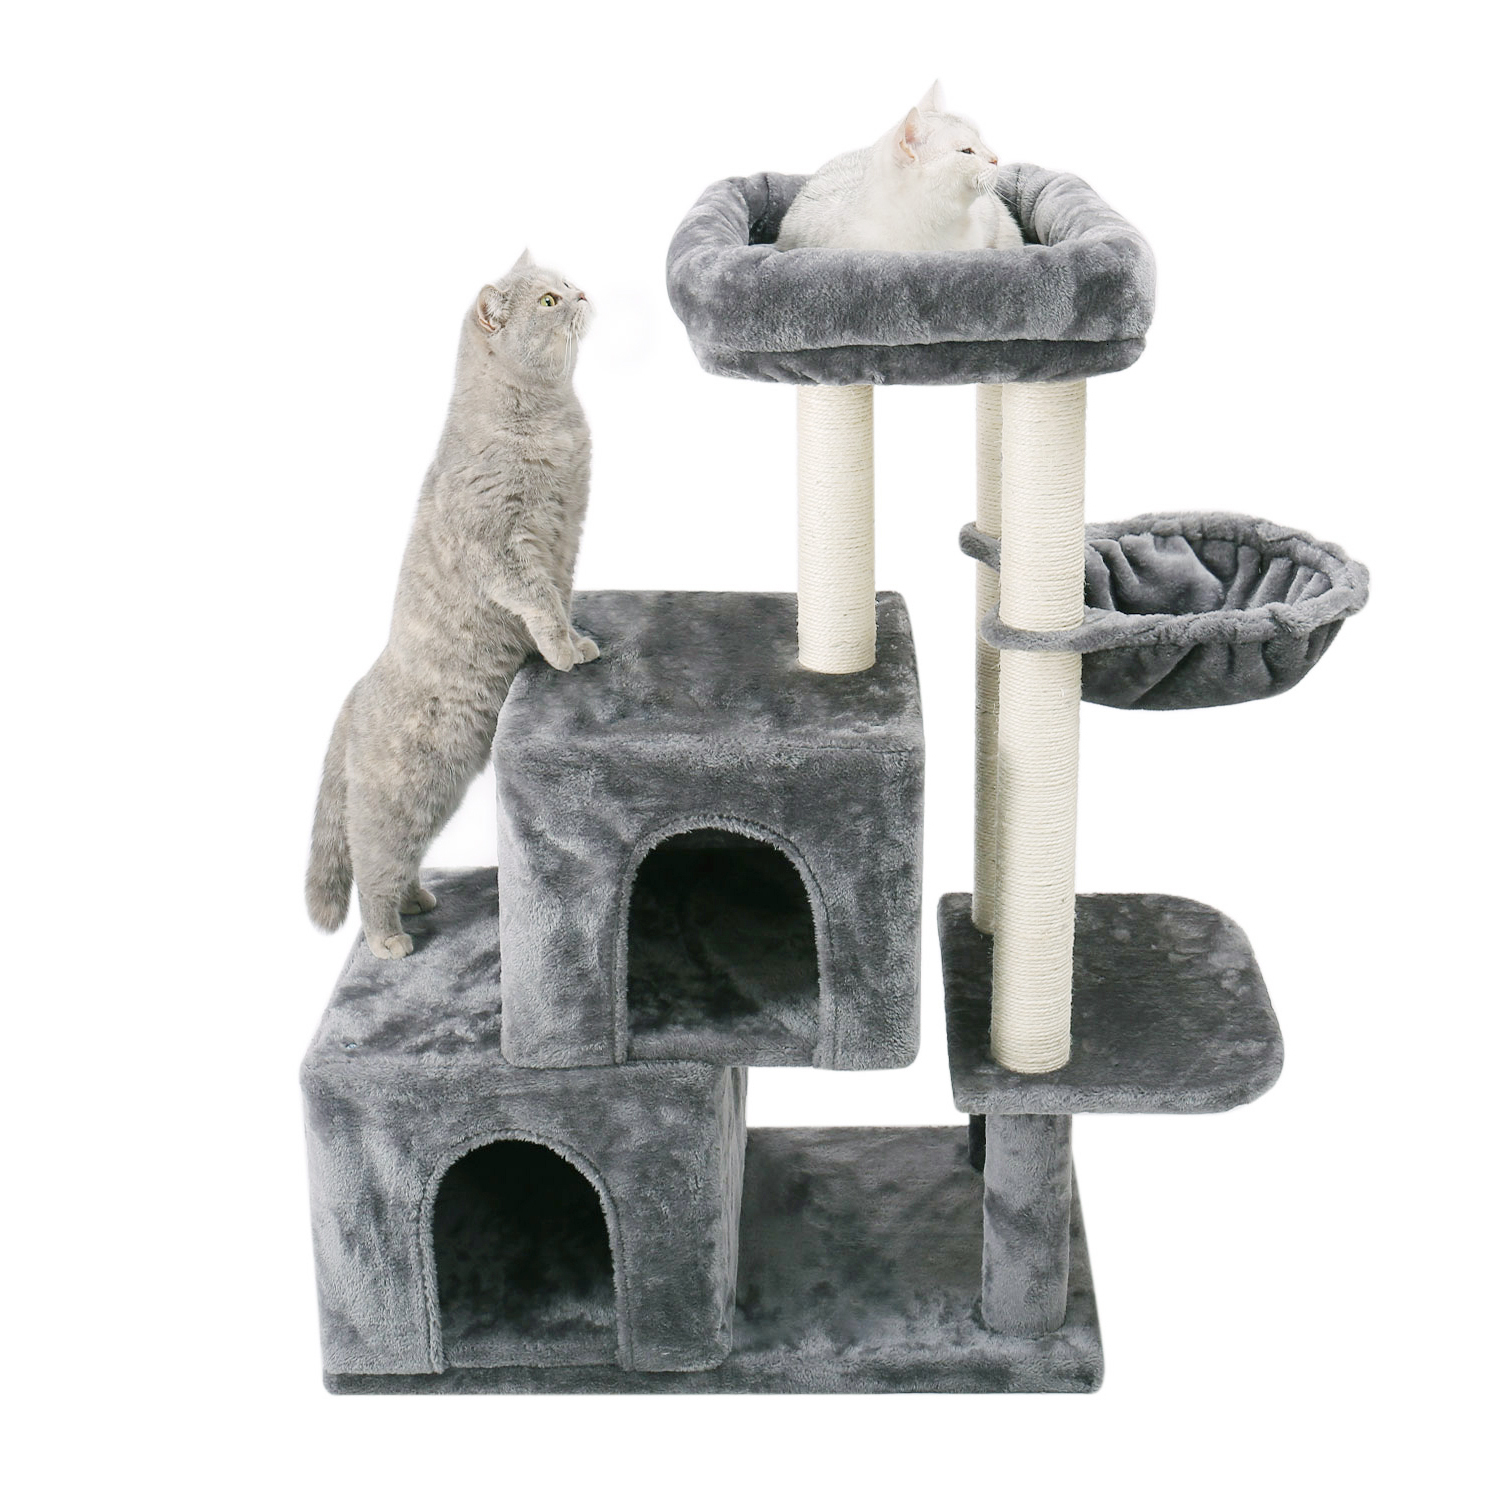 

2021 New Fast Delivery Big Cat Tree Tower Mobile Condo Scratching Post Pet Kitty Play House with Network Platform Poles 9xin